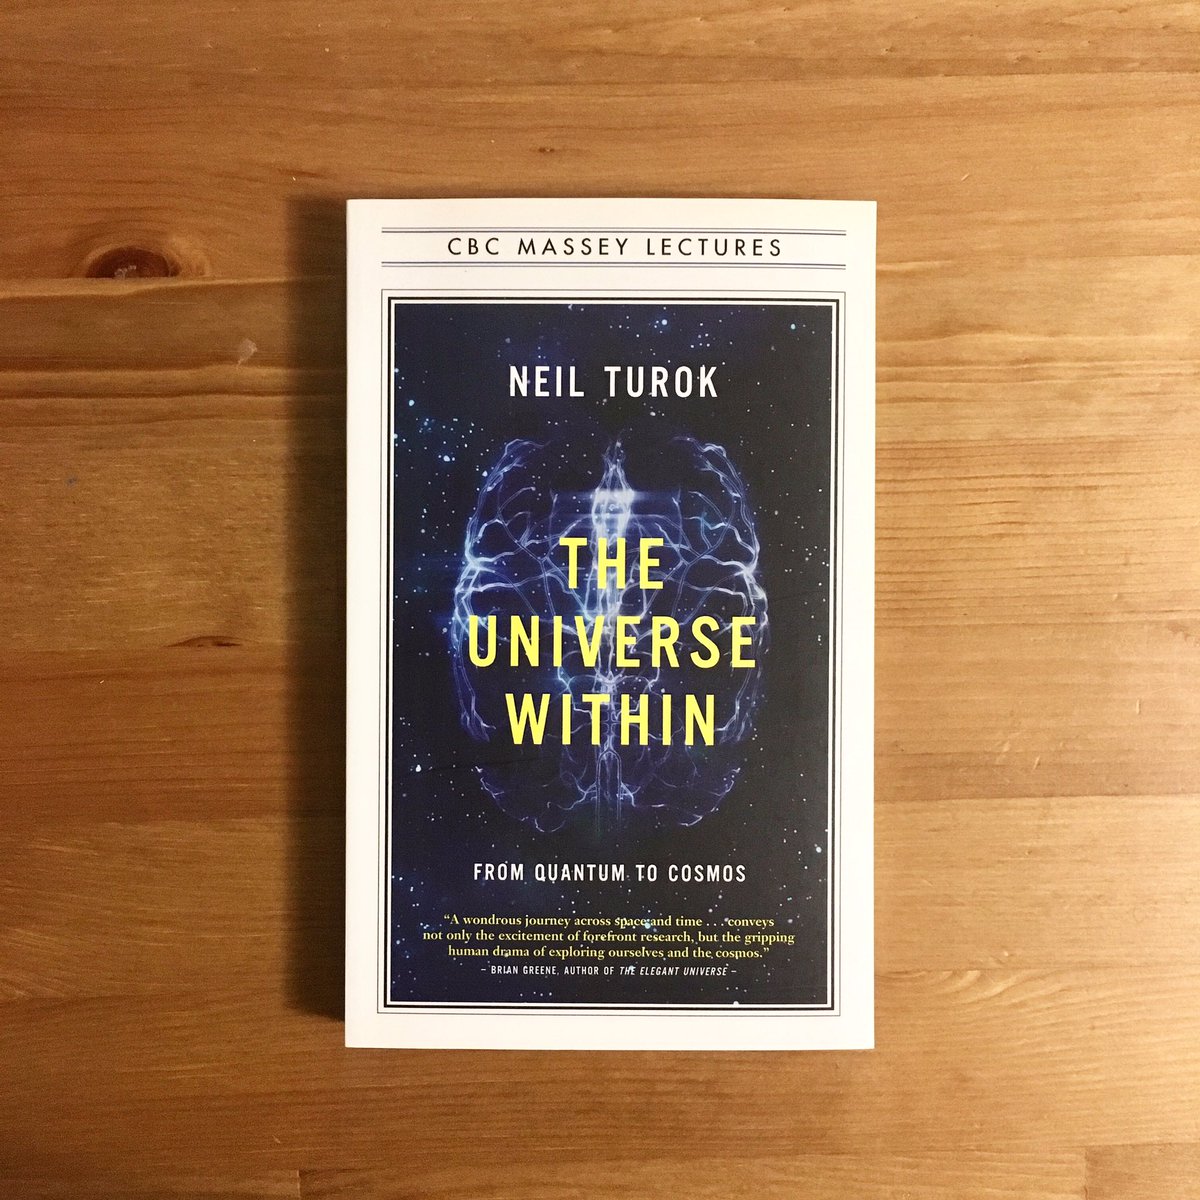 Exploring new paradigms of science and philosophy. 🌌💭 #TheUniverseWithin 📓